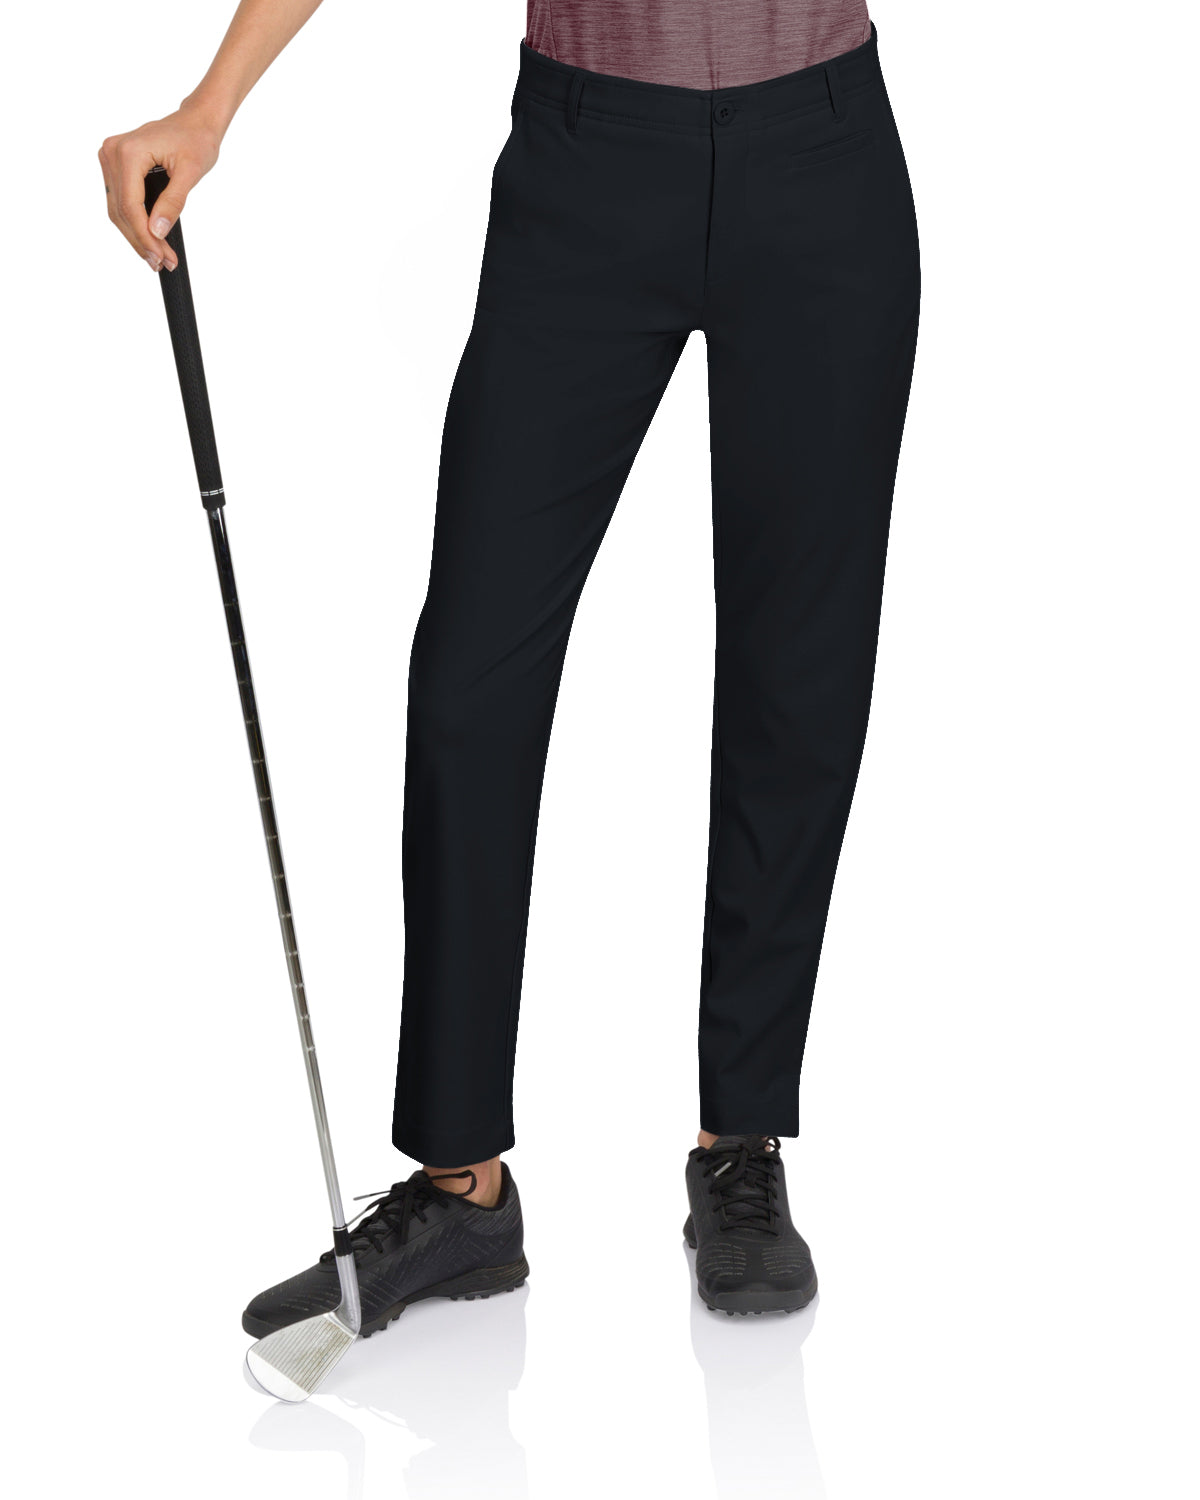 Three Sixty Six Women's Quick Dry Golf Pants - Front Coin Pocket